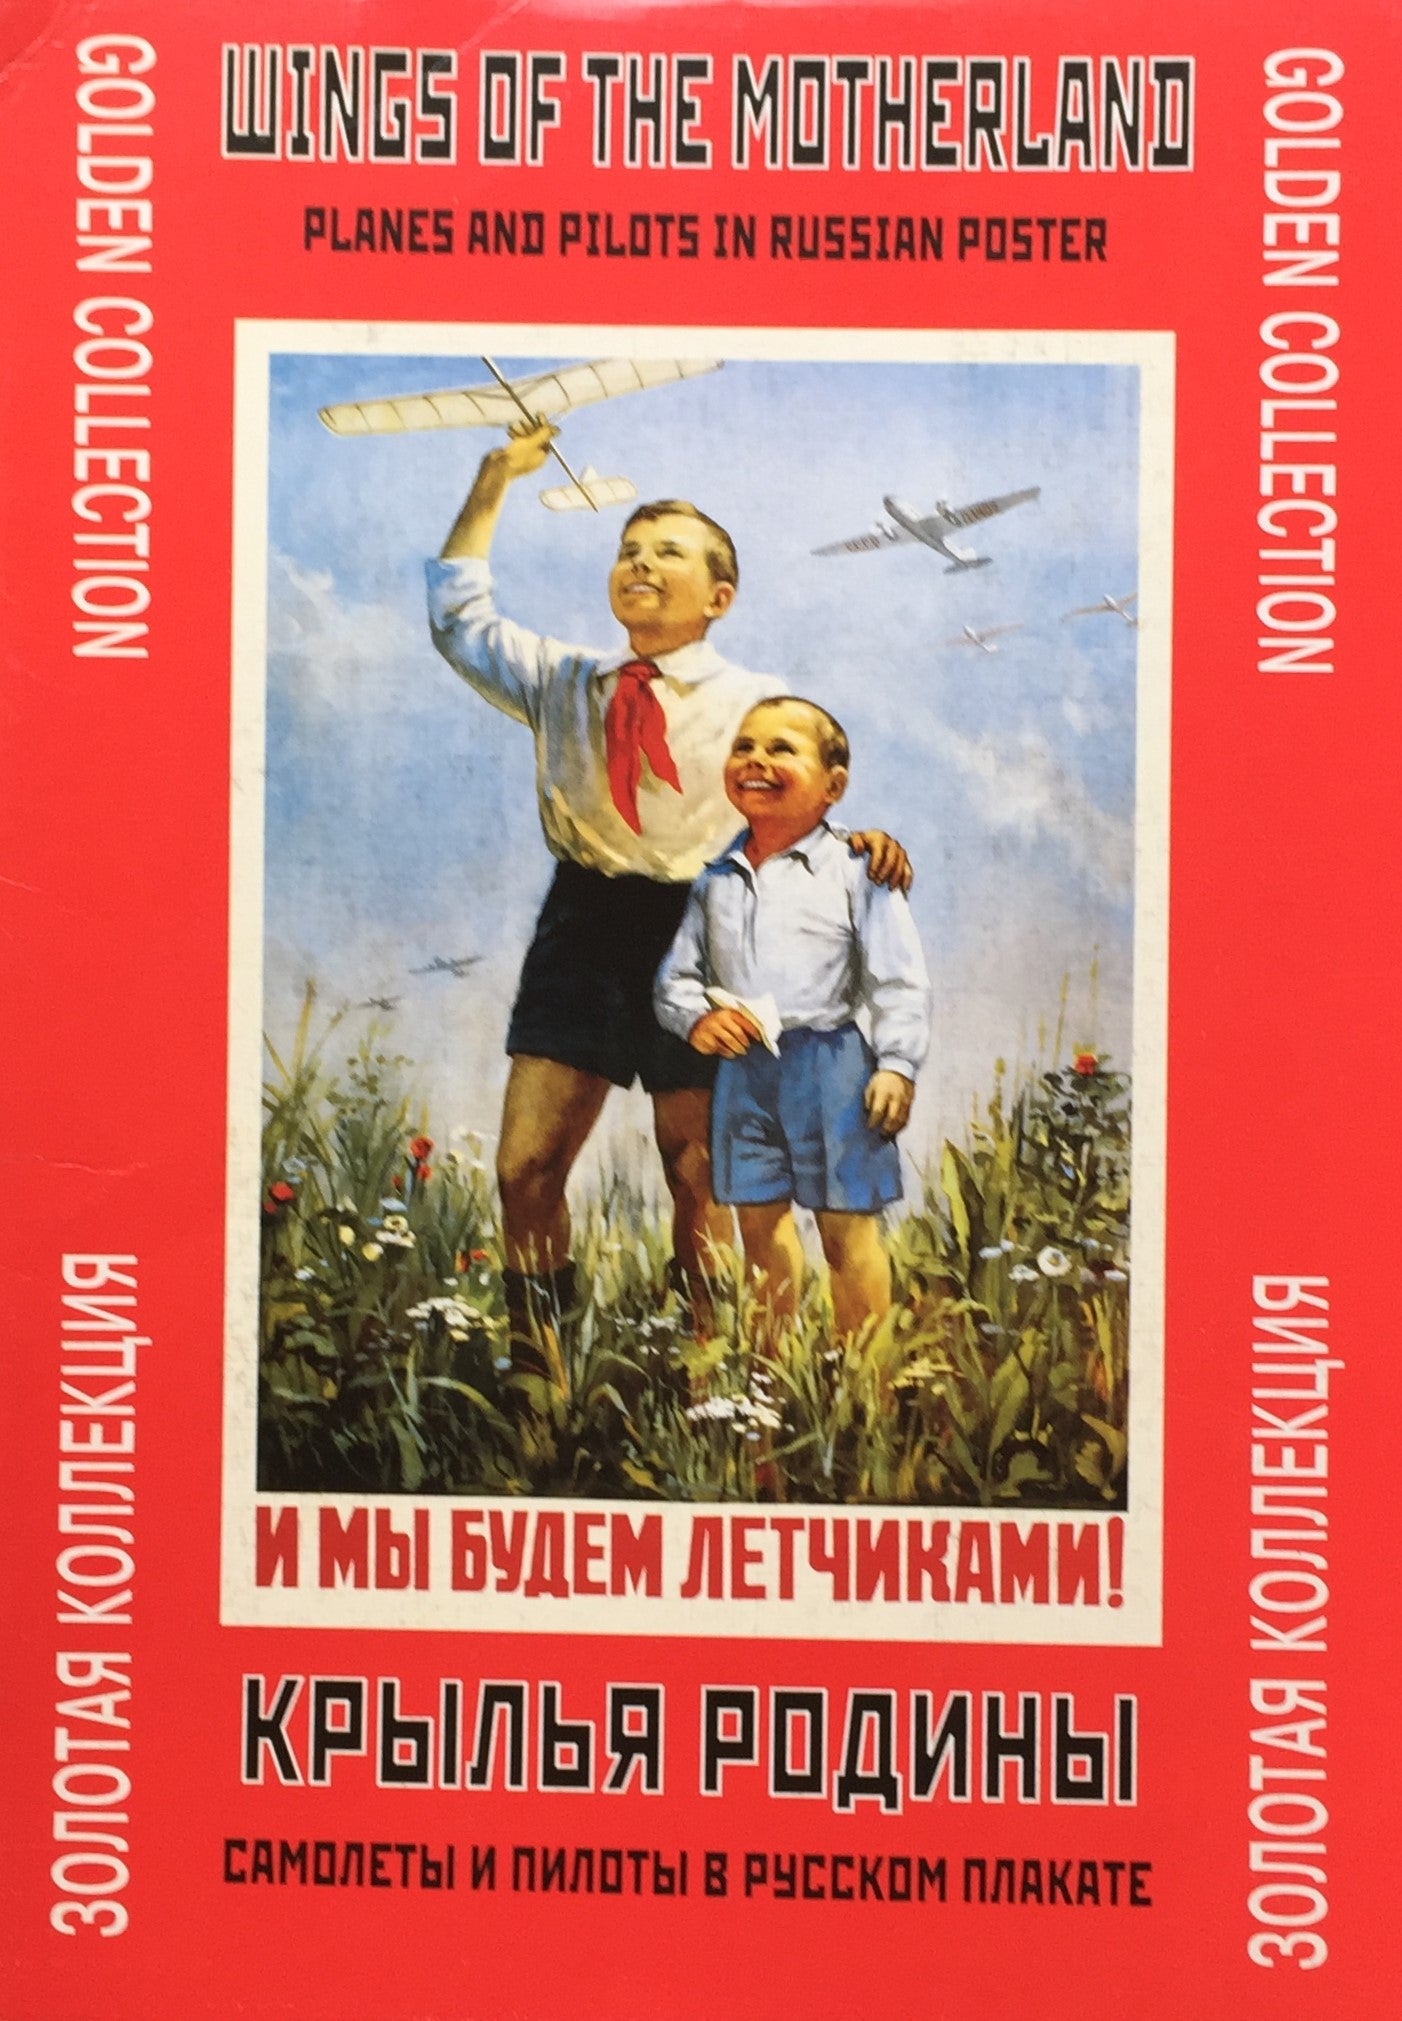 Wings of The Motherland　Planes and Pilots In Russian Poster　祖国の翼　ロシアのポスター　飛行機とパイロット　20枚セット